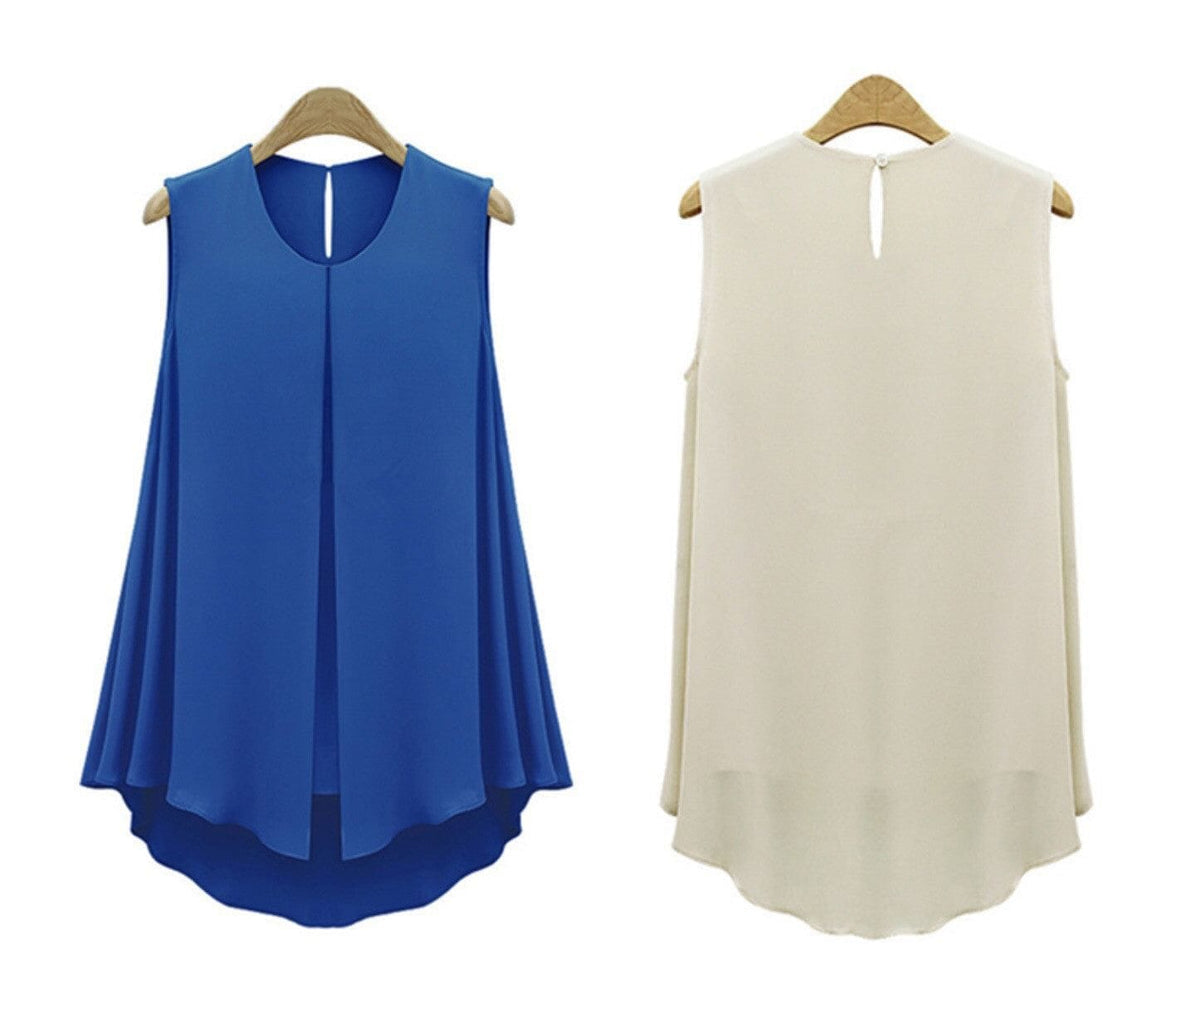 New Women Tops Sleeveless O-neck Casual Shirt in Blue & Apricot ...